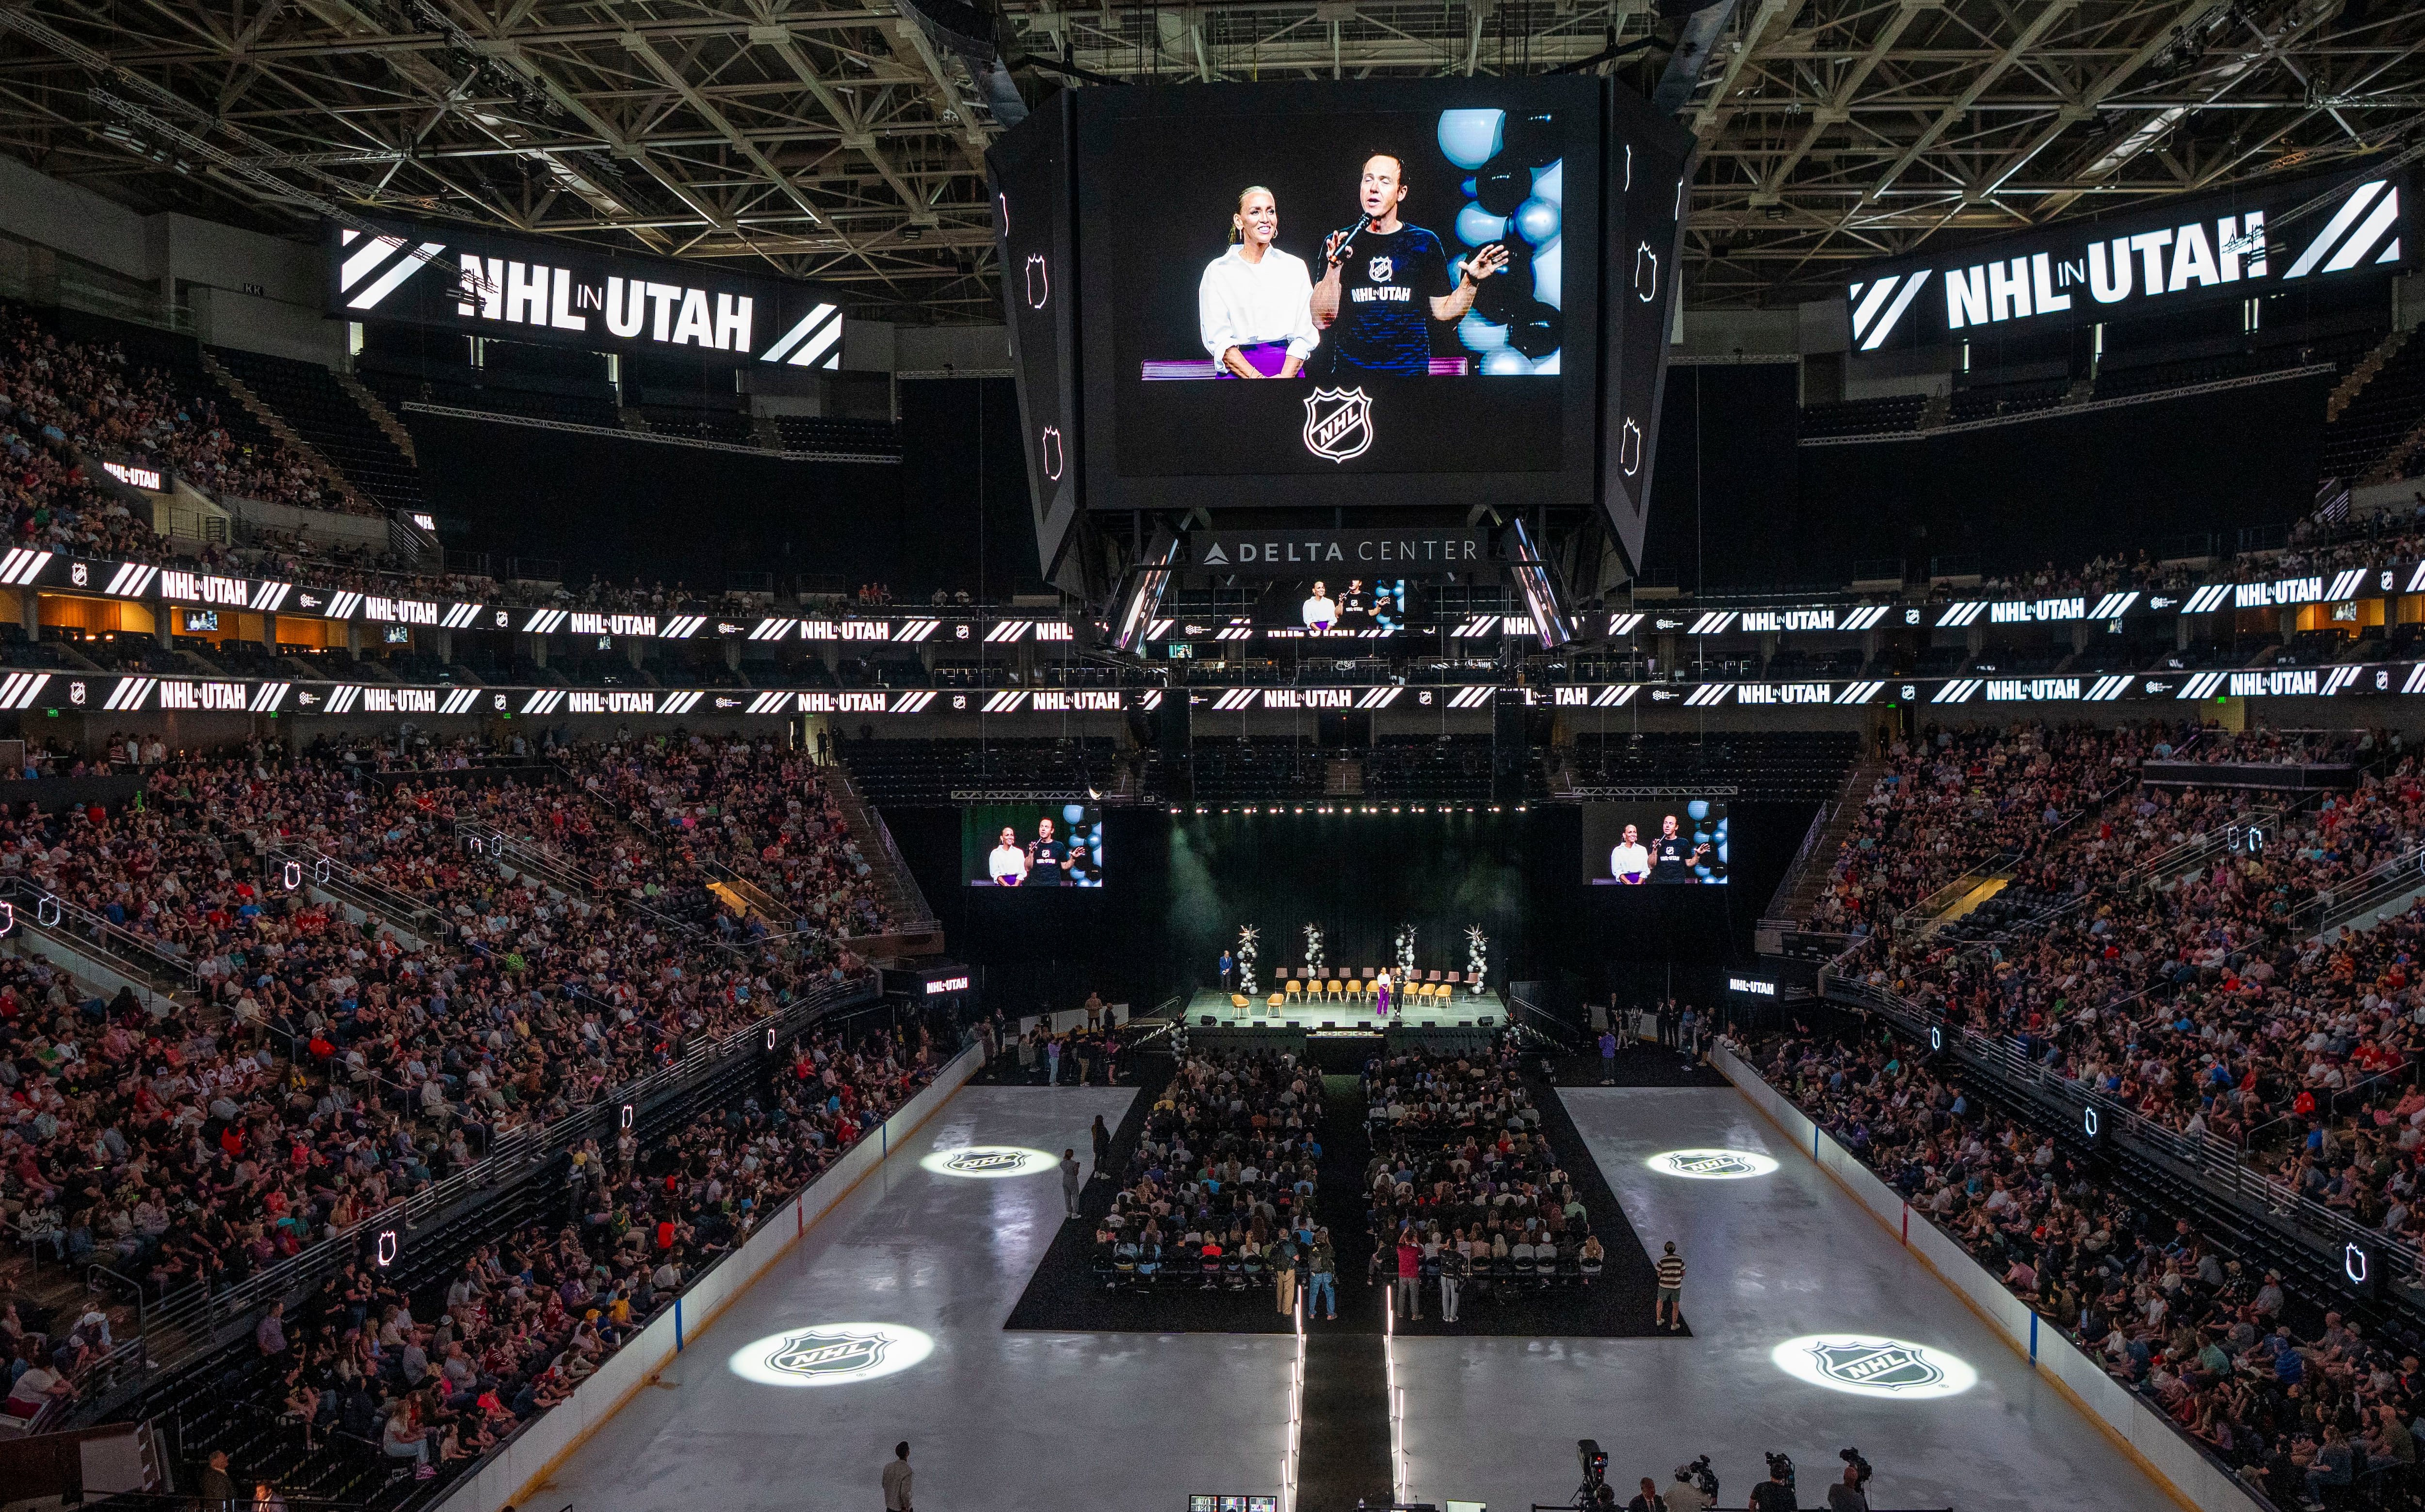 (Rick Egan | The Salt Lake Tribune) The Delta Center is photographed during an introduction for the Utah NHL team on Wednesday, April 24, 2024. On screen are team owners Ryan and Ashley Smith.